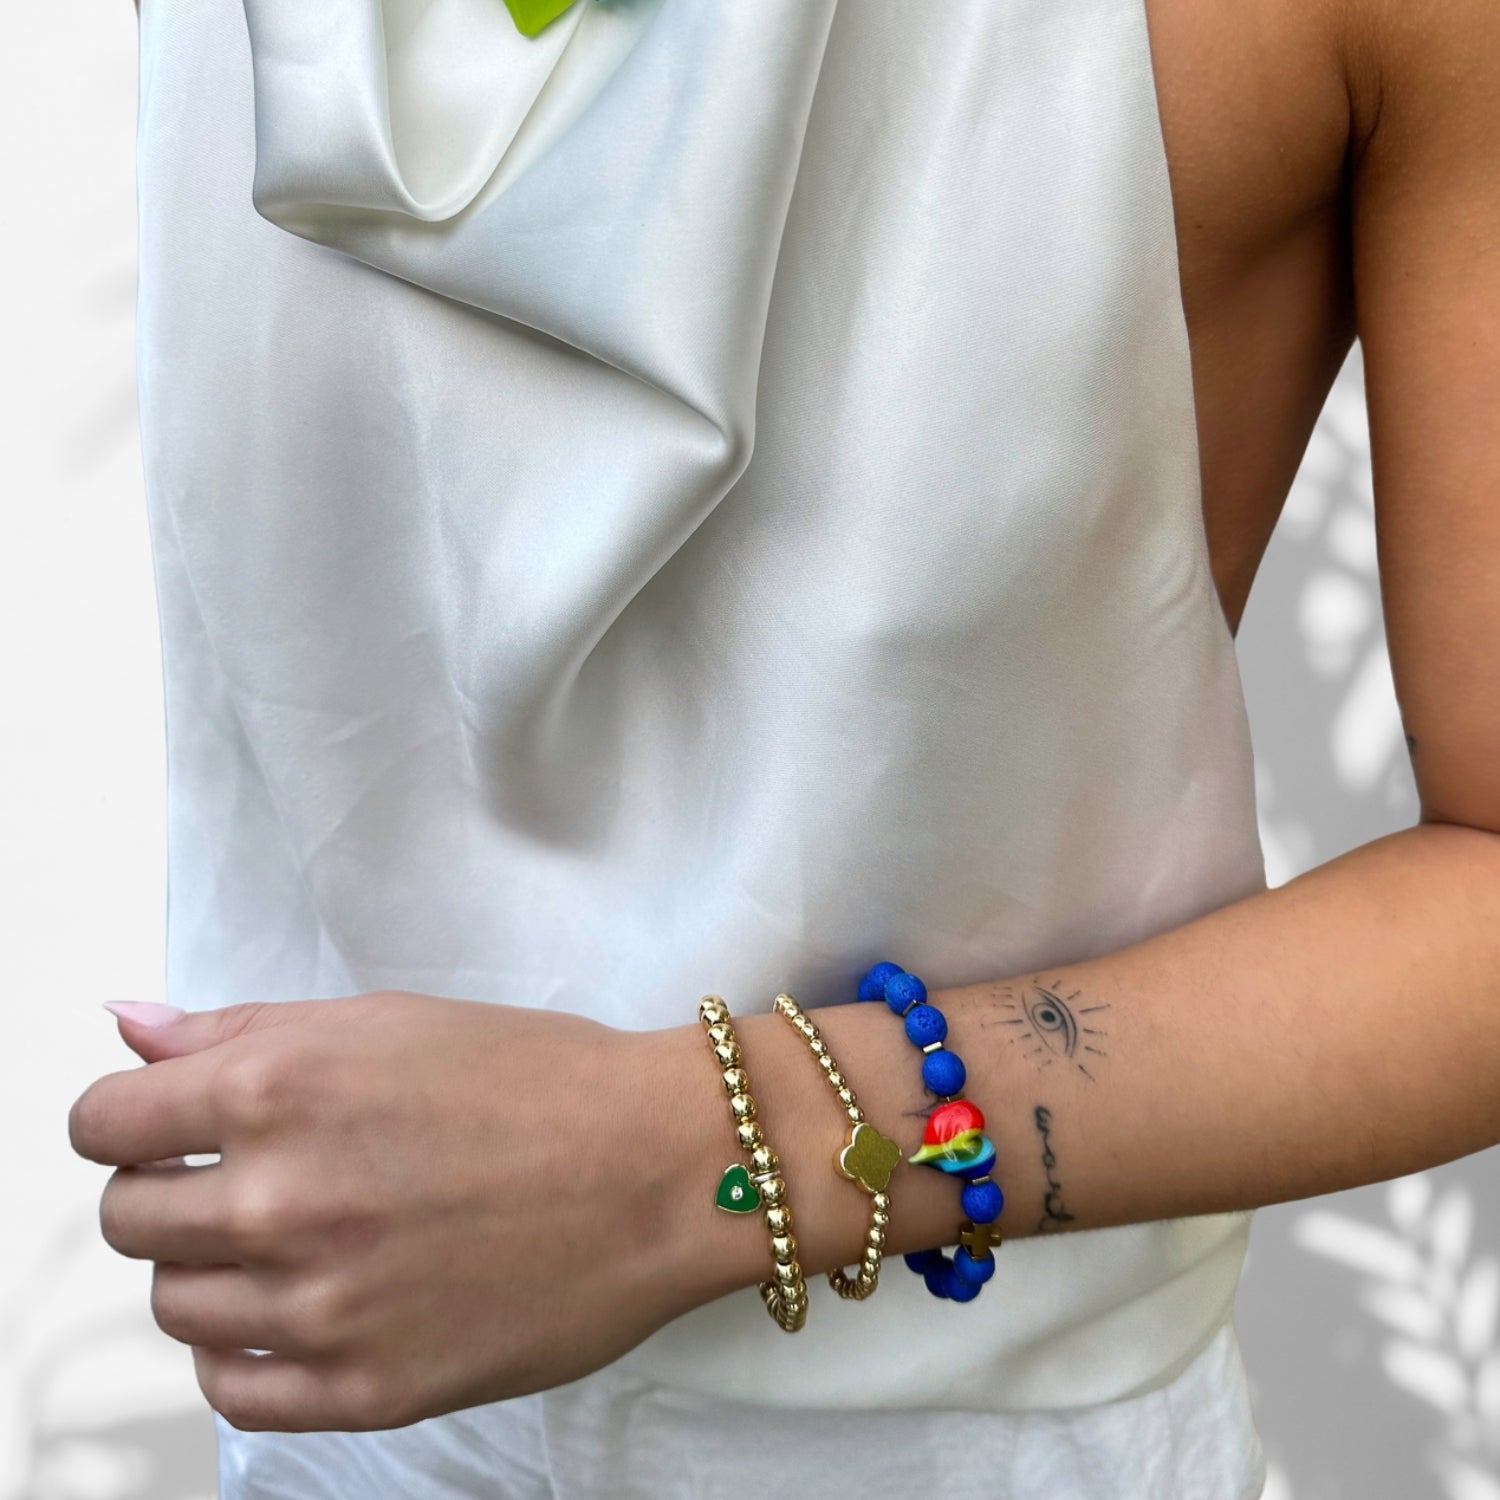 Natural Beauty and Energy: Model Wearing Blue Lava Rock Beads in Bracelet